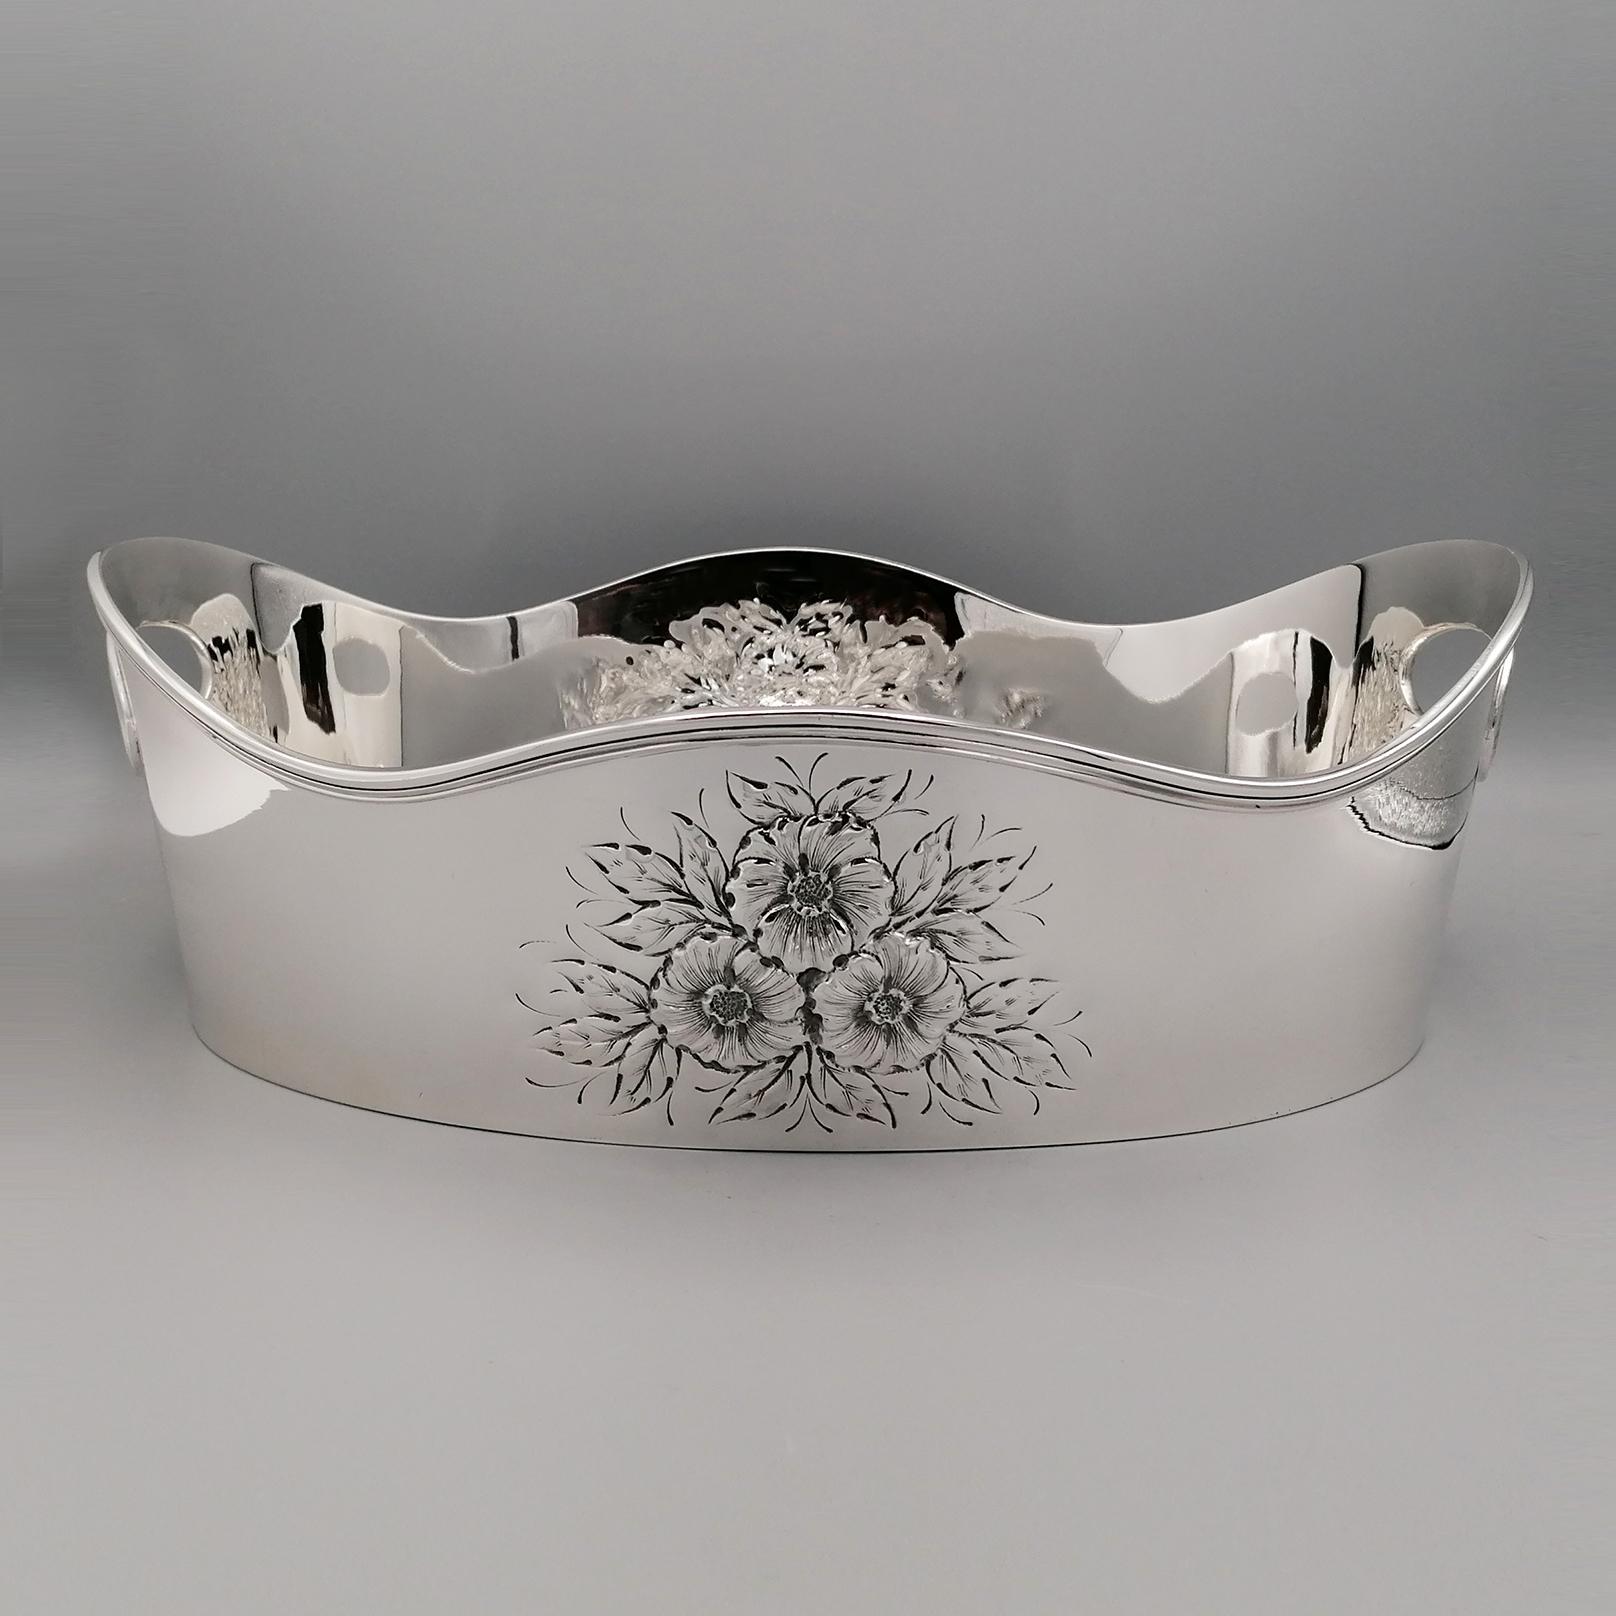 Oval centerpiece in sterling silver made entirely by hand.
The centerpiece is wave-shaped and finished on the upper part with an English-style border, which also surrounds the oval holes on the short sides, made to facilitate grip.
On the long parts